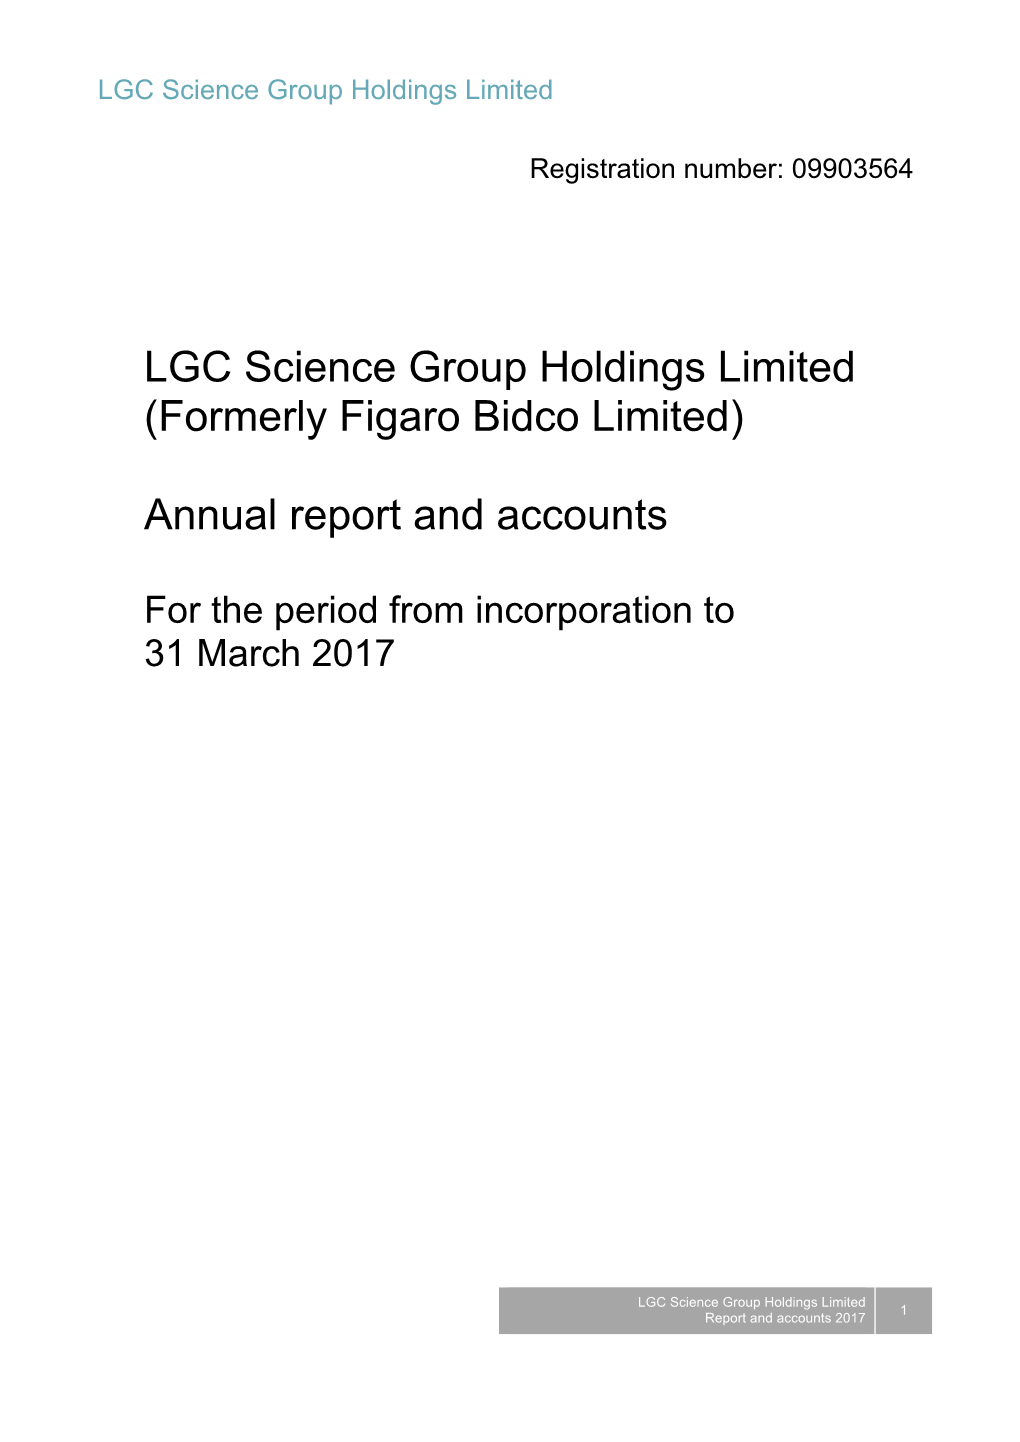 LGC Science Group Holdings Limited (Formerly Figaro Bidco Limited)